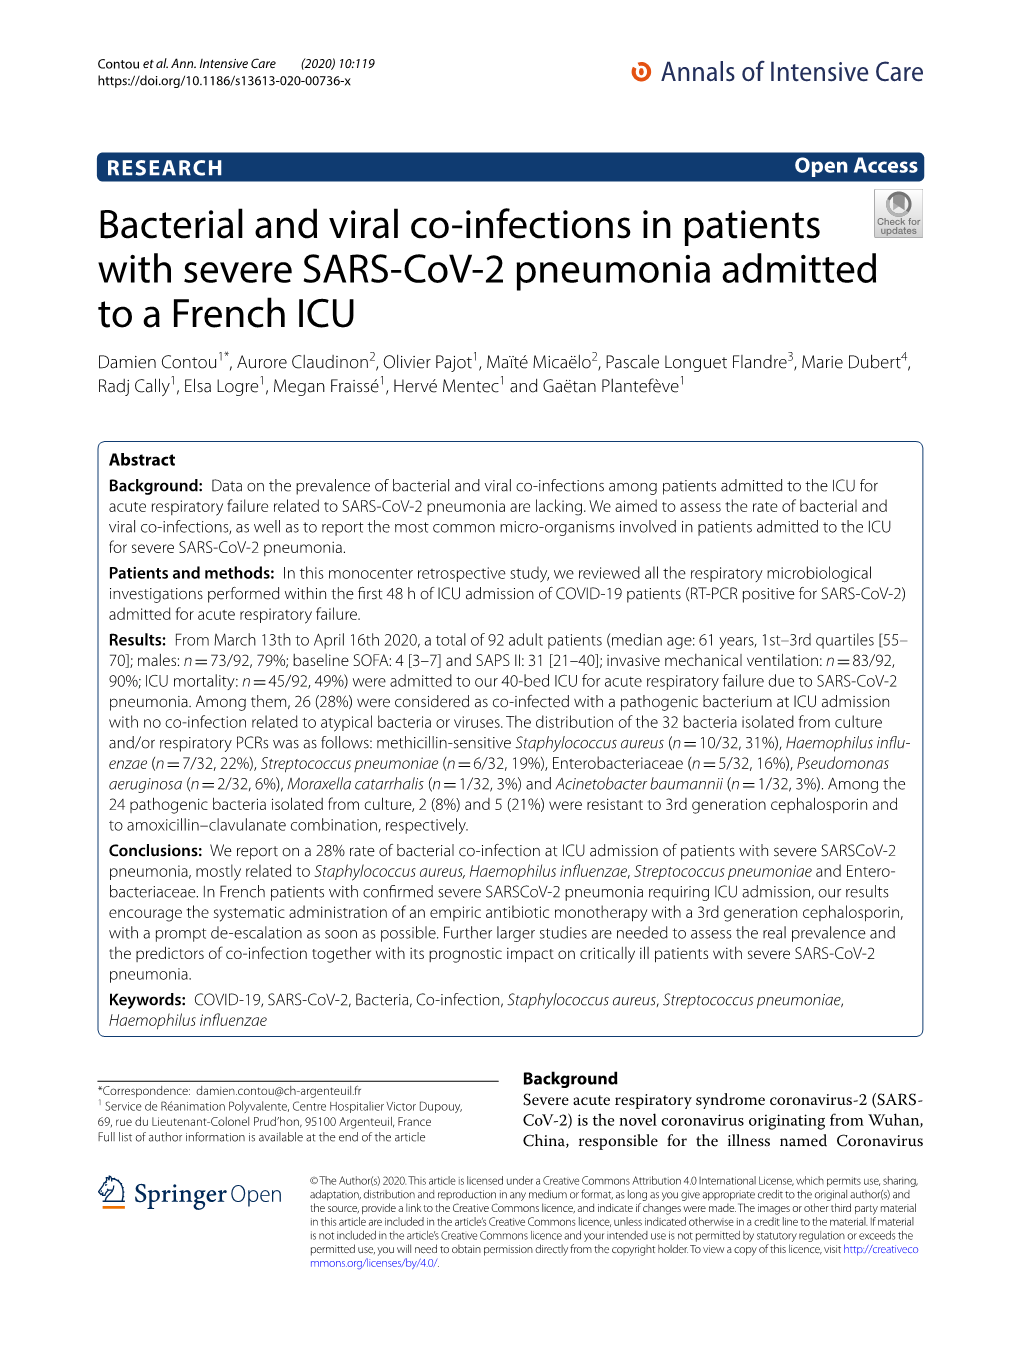 Bacterial and Viral Co-Infections in Patients with Severe SARS-Cov-2